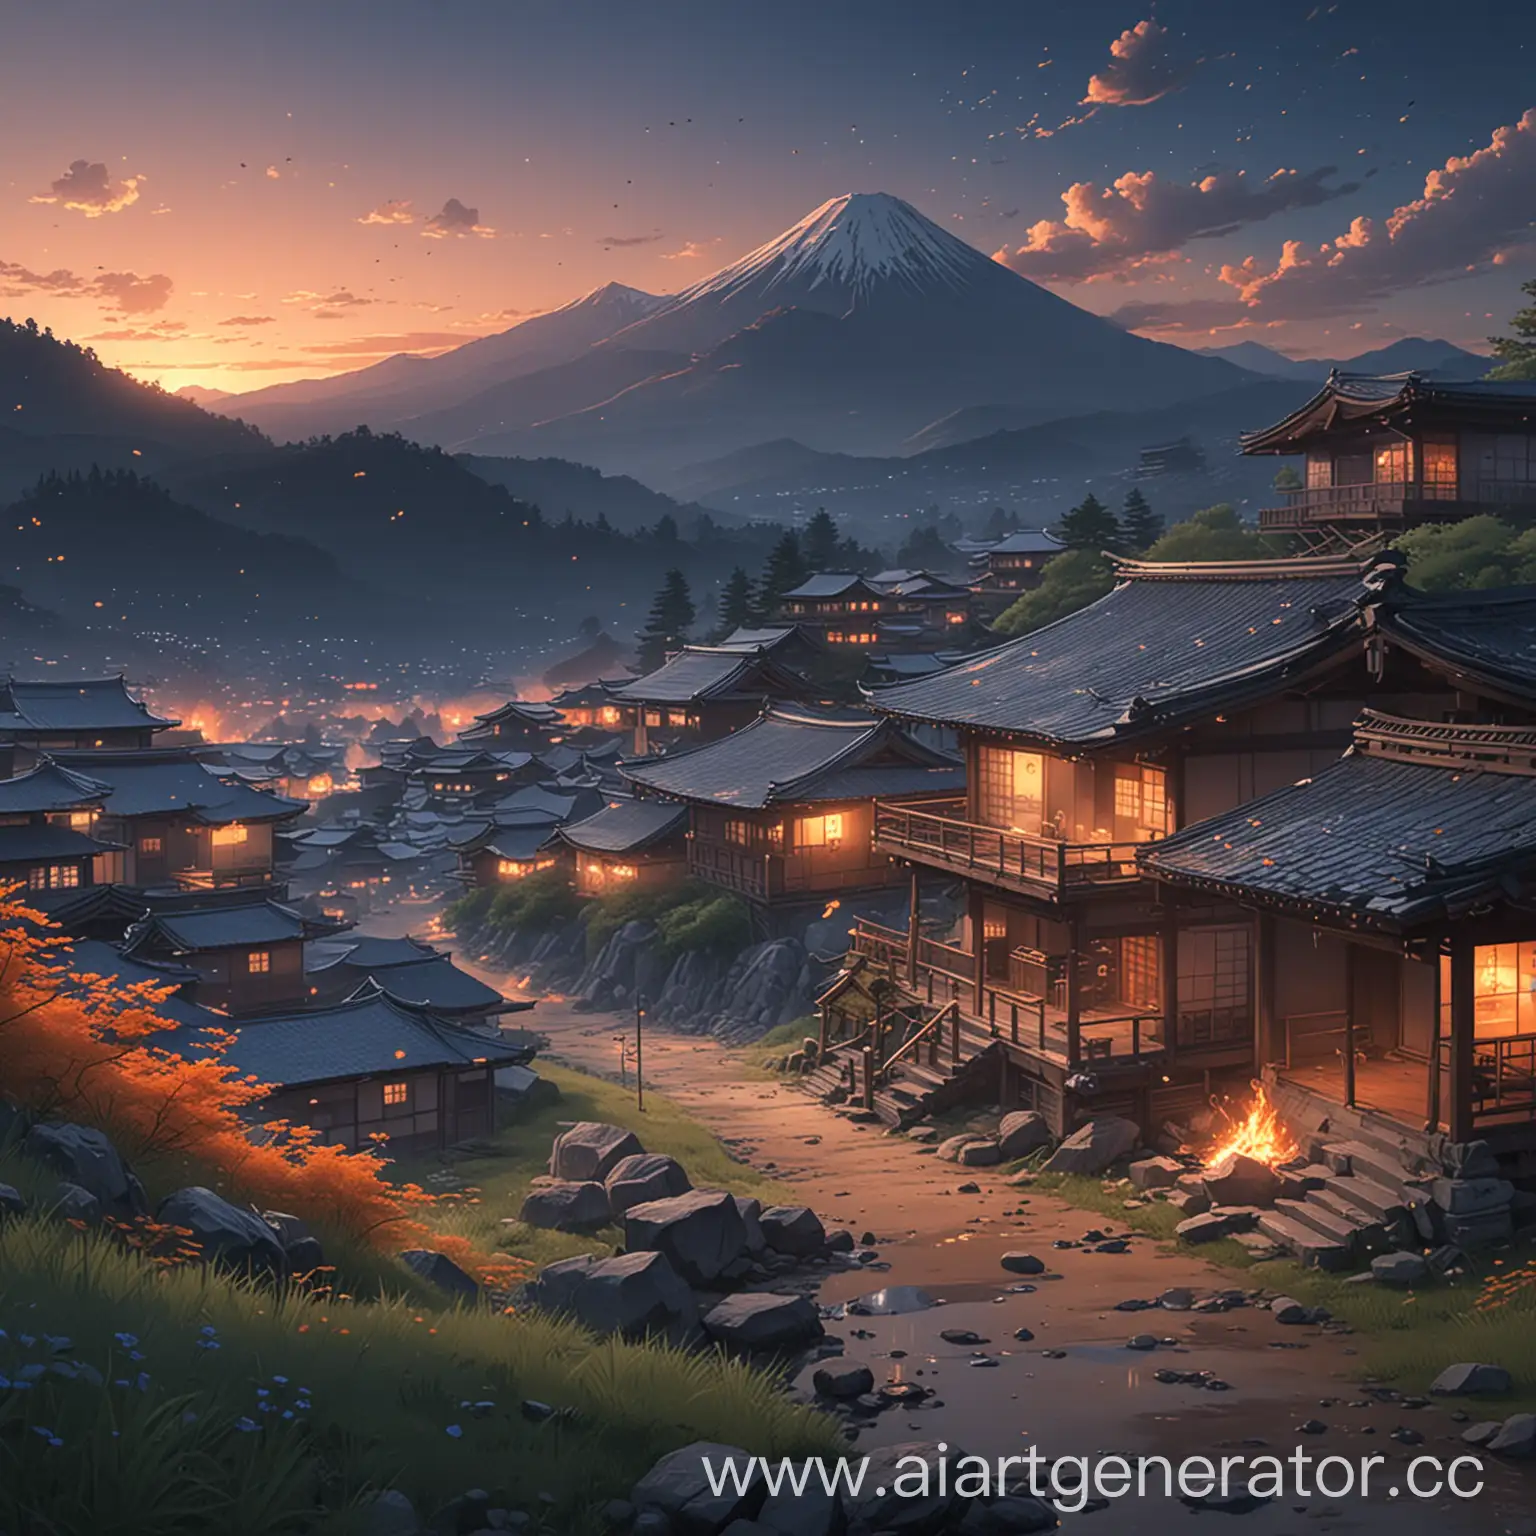 Tranquil-Dawn-Landscape-with-Japanese-House-Engulfed-in-Flames